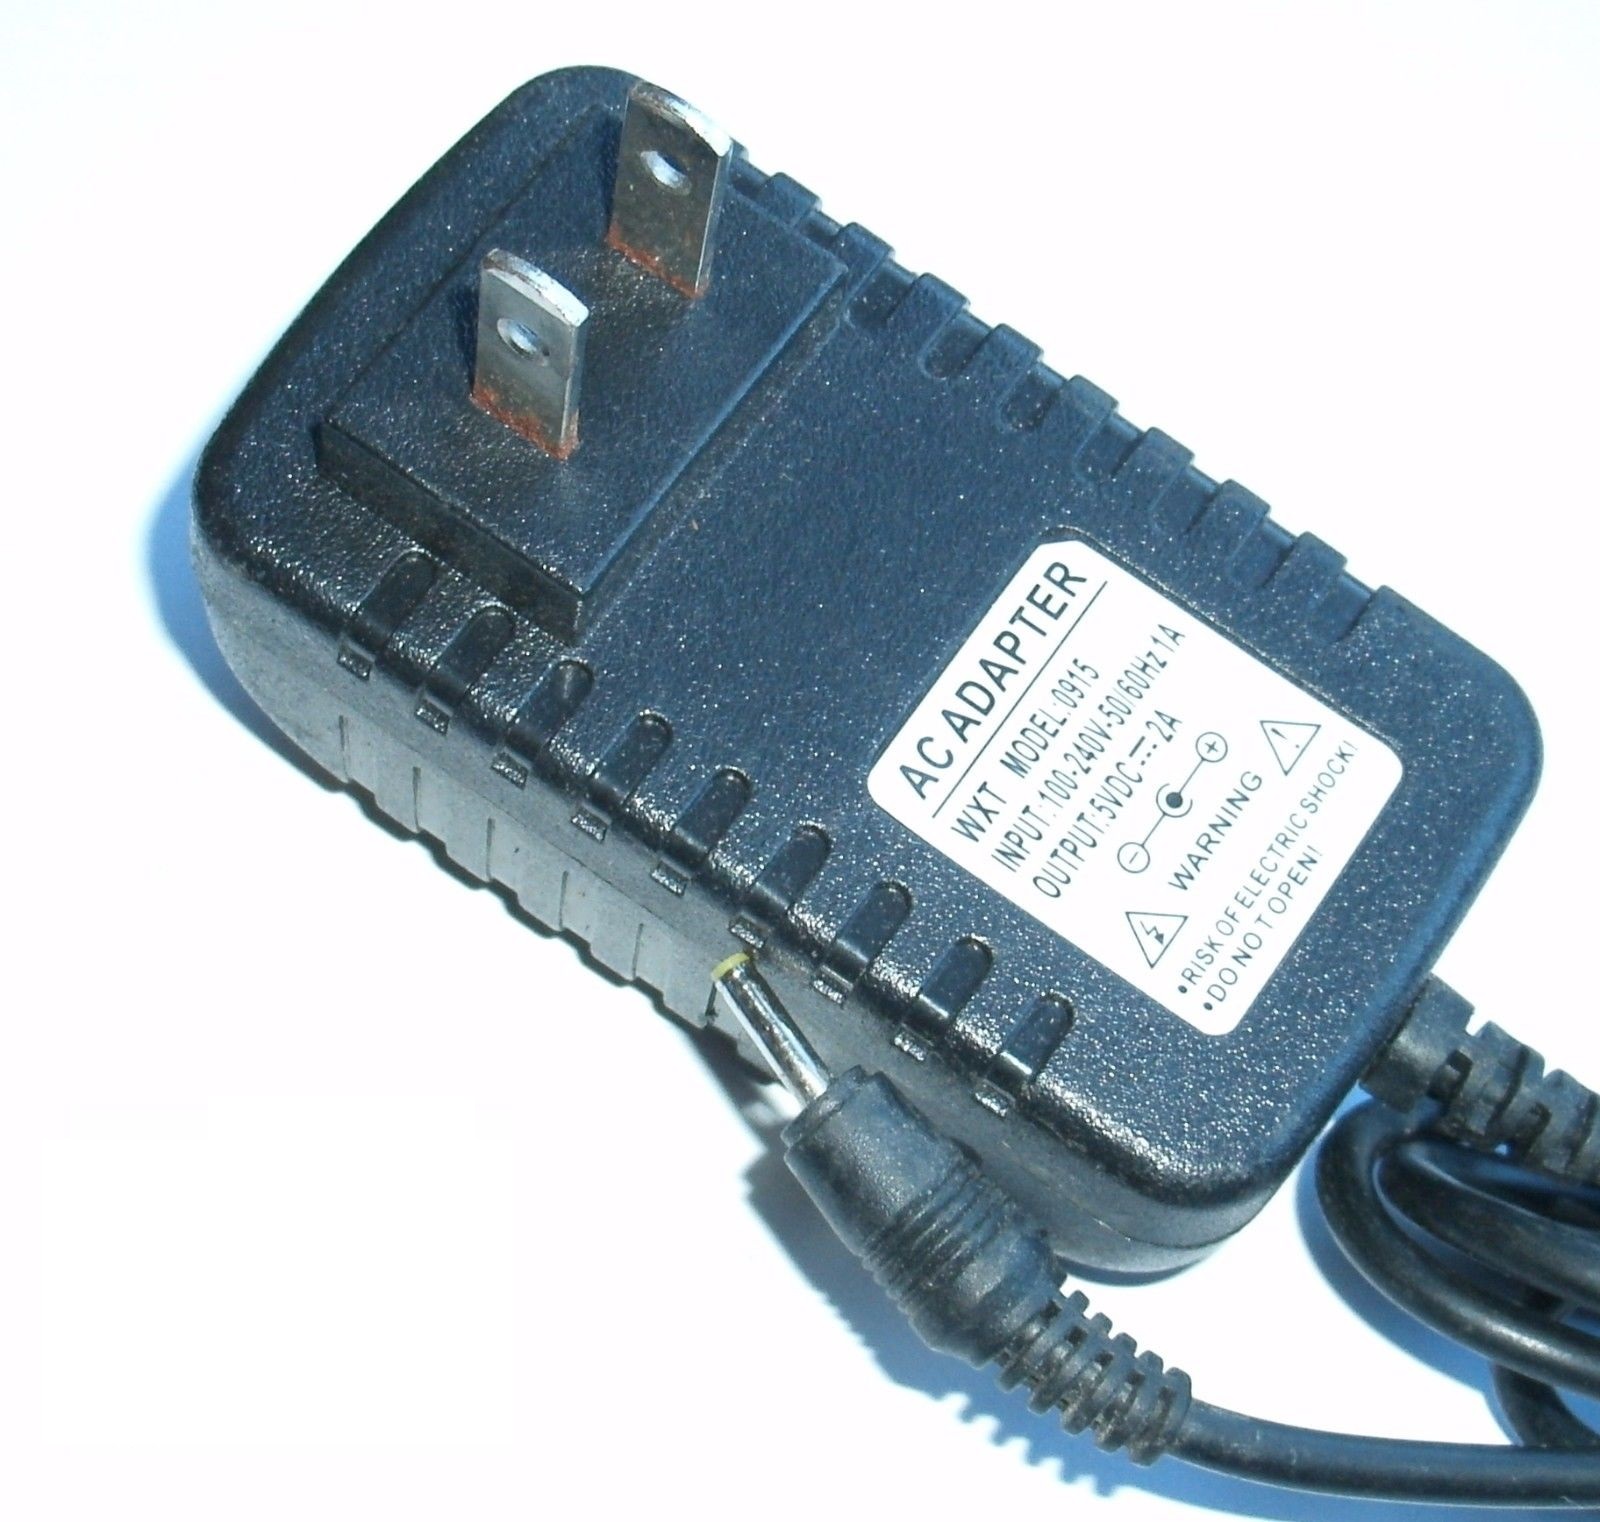 *100% Brand NEW* 5V DC 2A WXT AC ADAPTER 0915 POWER SUPPLY